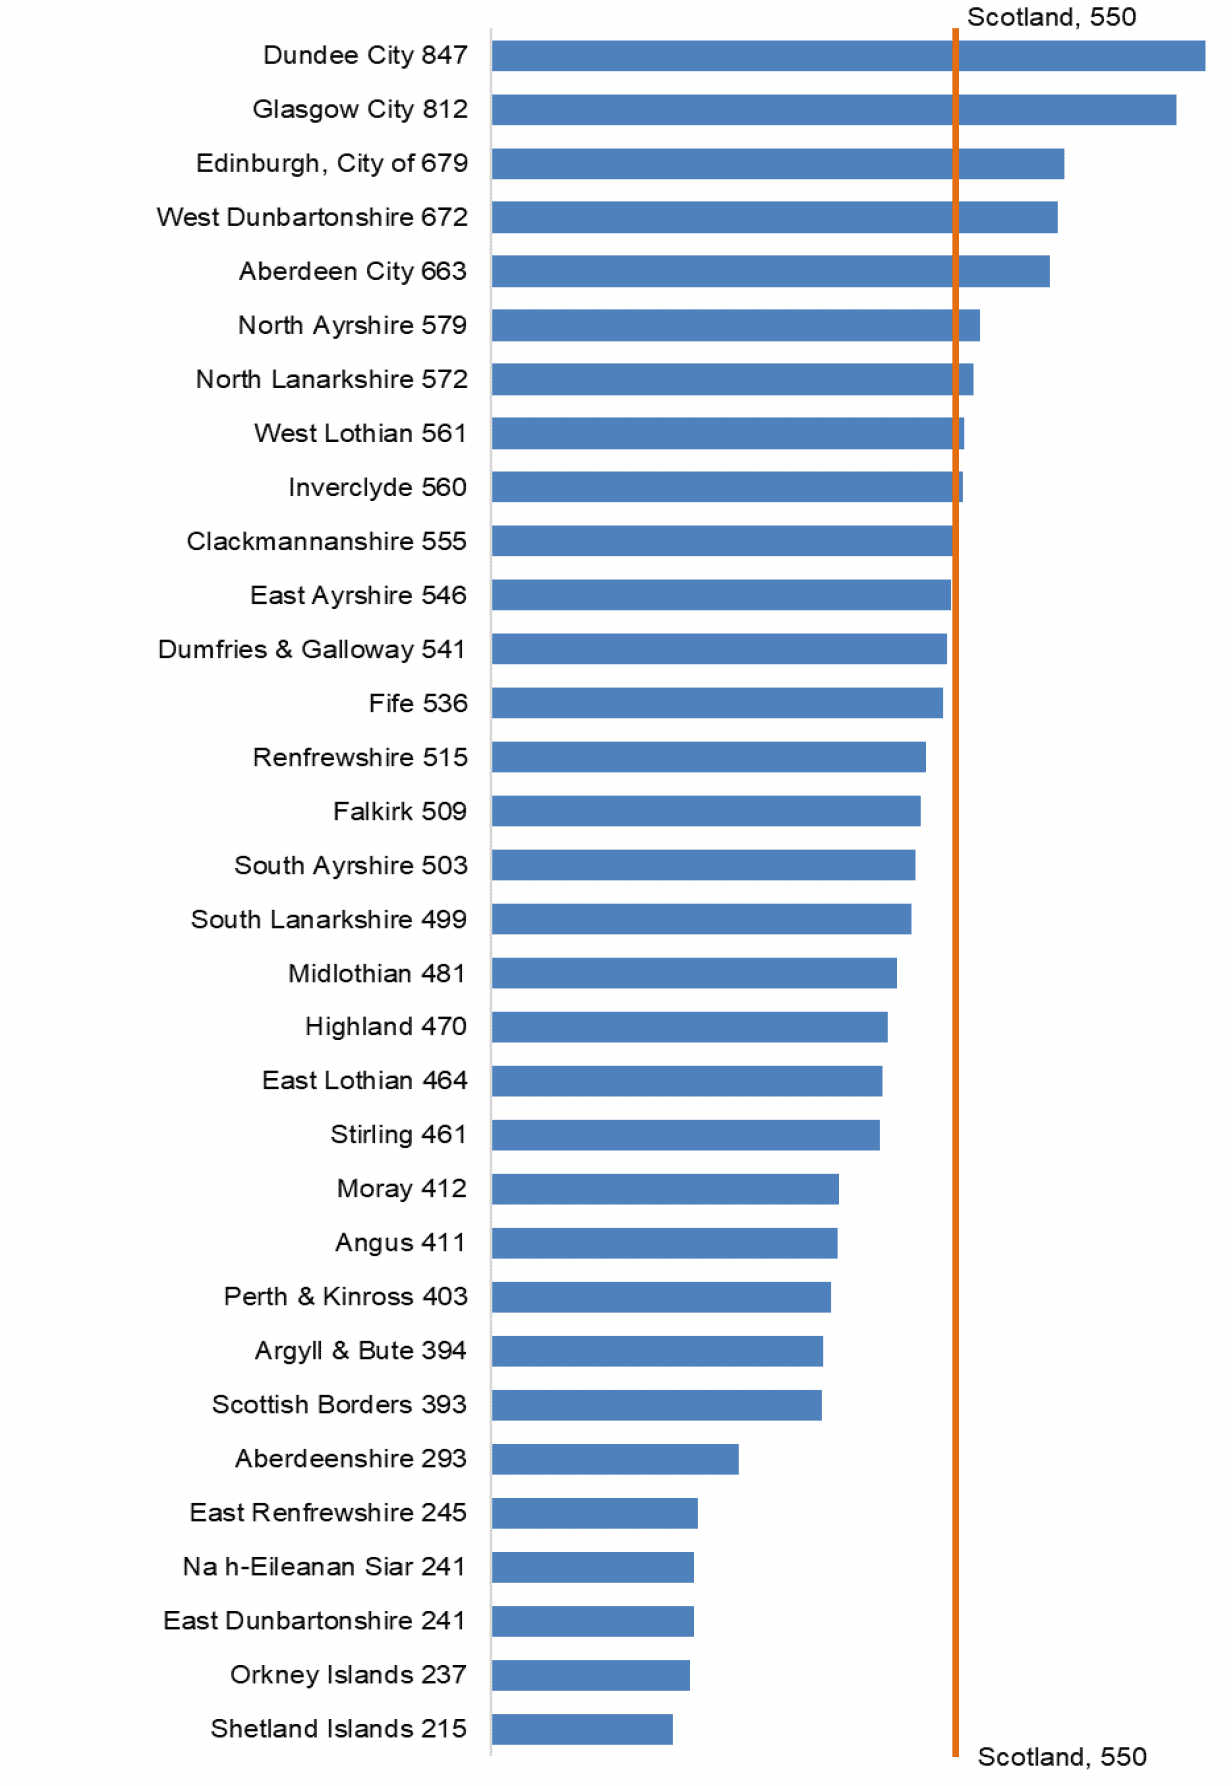 A bar chart showing the total recorded crime rate per 10,000 population by Local Authority. It shows that Dundee City had the highest rate and the Shetland Islands had the lowest.